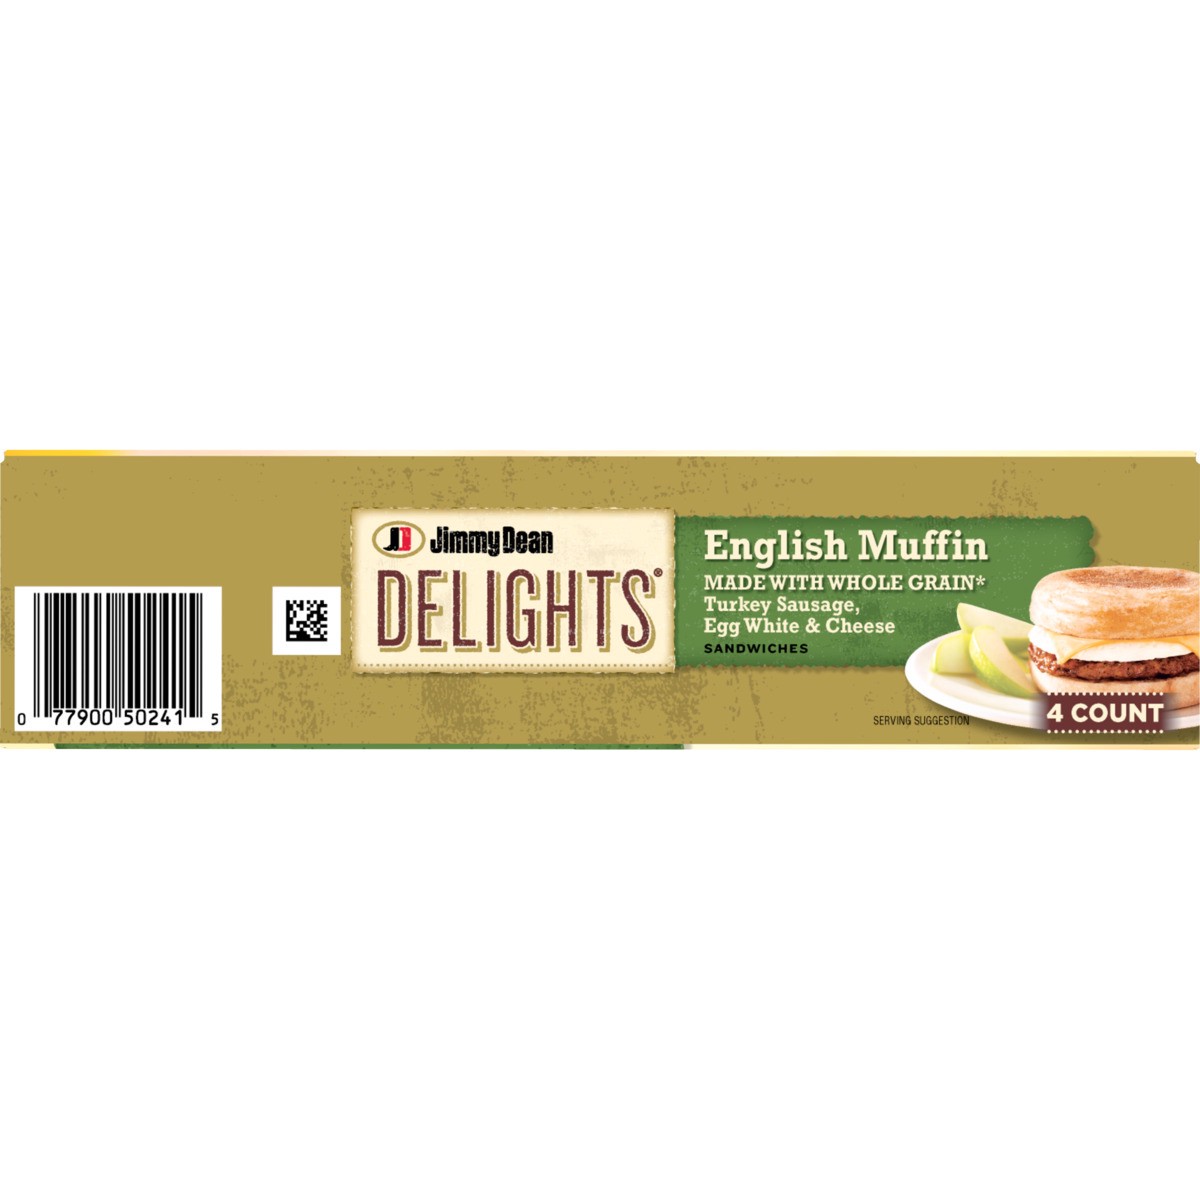 slide 9 of 9, Jimmy Dean Delights English Muffin Breakfast Sandwiches with Turkey Sausage, Egg White, and Cheese, Frozen, 4 Count, 20.4 oz